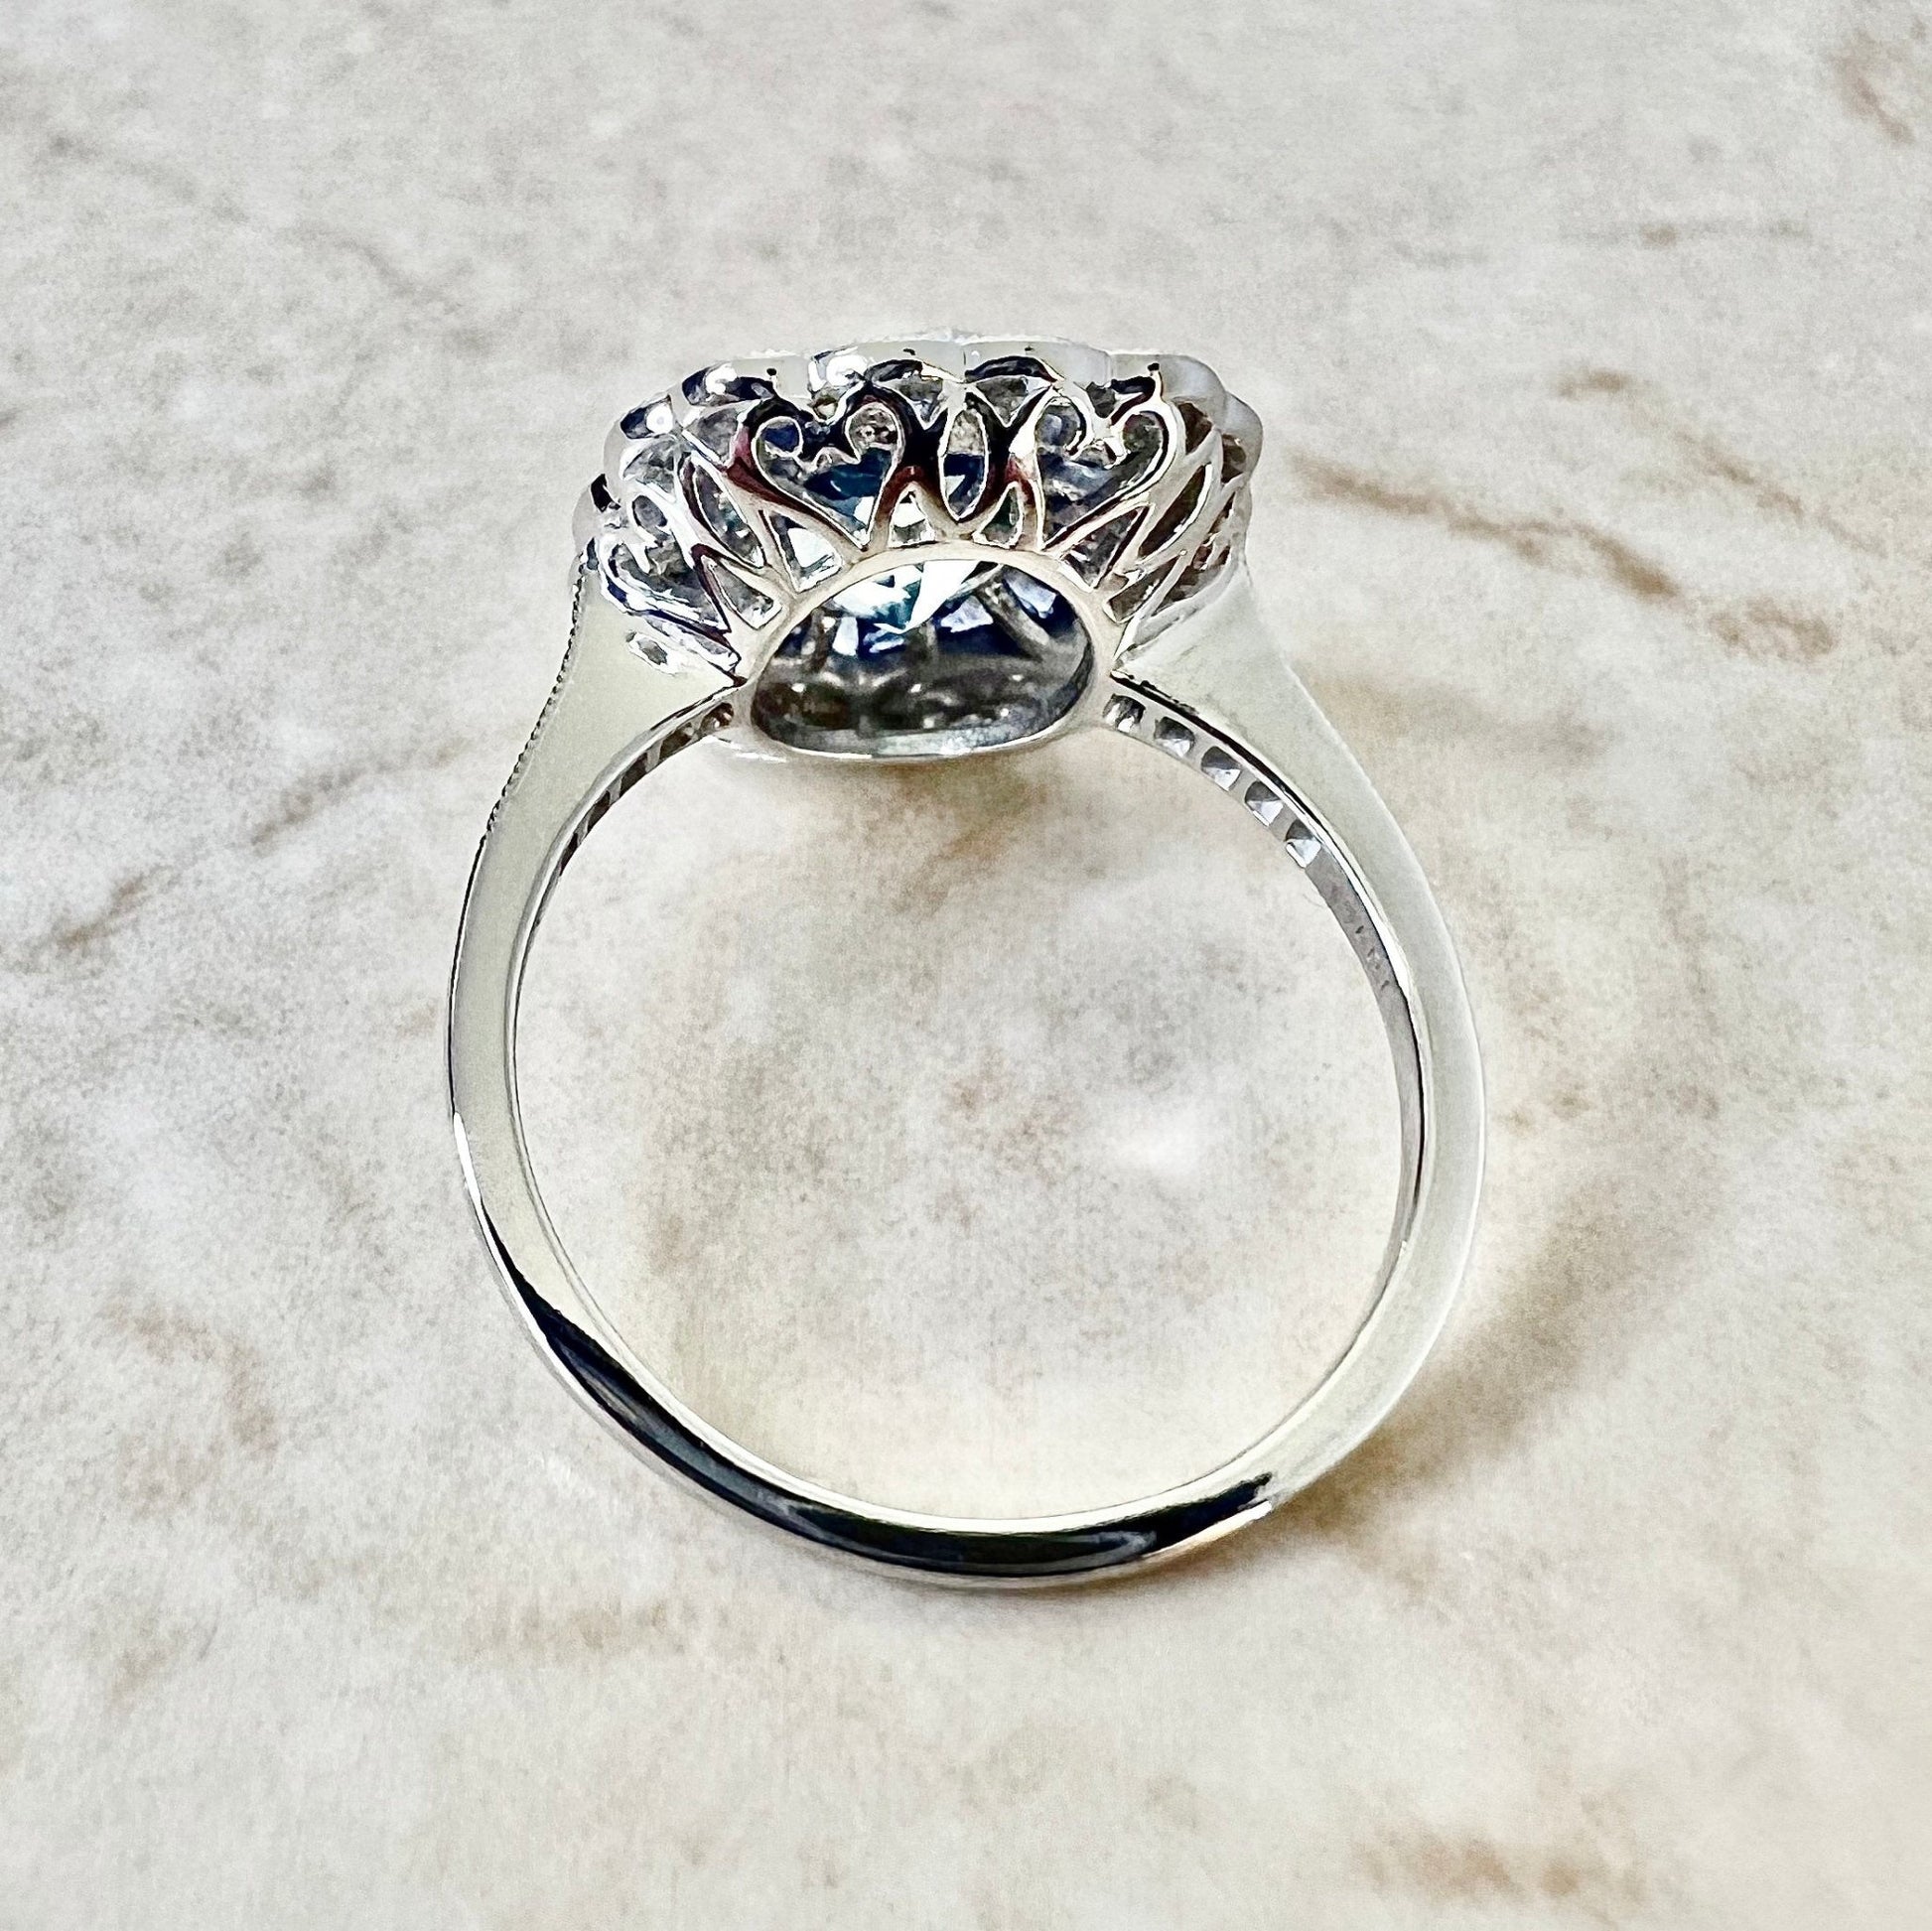 Very Fine Handcrafted Platinum Art Deco Style Oval Aquamarine, Sapphire & Diamond Halo Ring - Cocktail Ring - Engagement Ring - Promise Ring